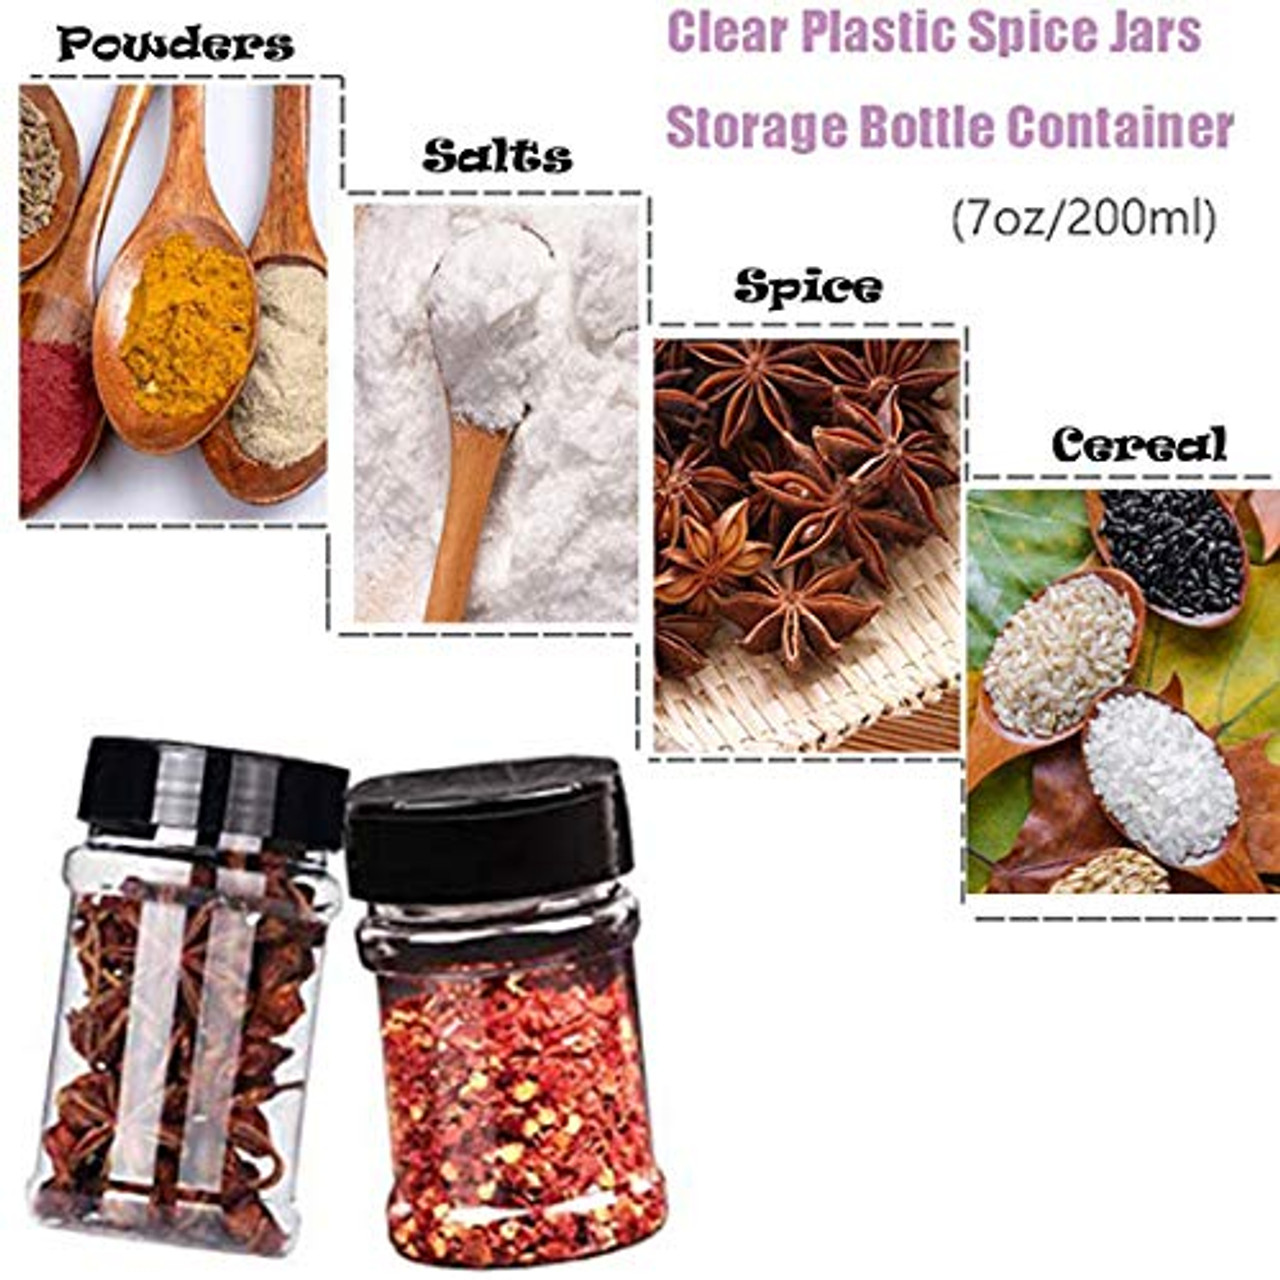 Mimorou 30 Pack 8.7 oz Plastic Spice Jars with Shaker Lids Clear Seasoning  Containers Spice Bottles for Kitchen Storing Spice Herbs Seasoning Powders